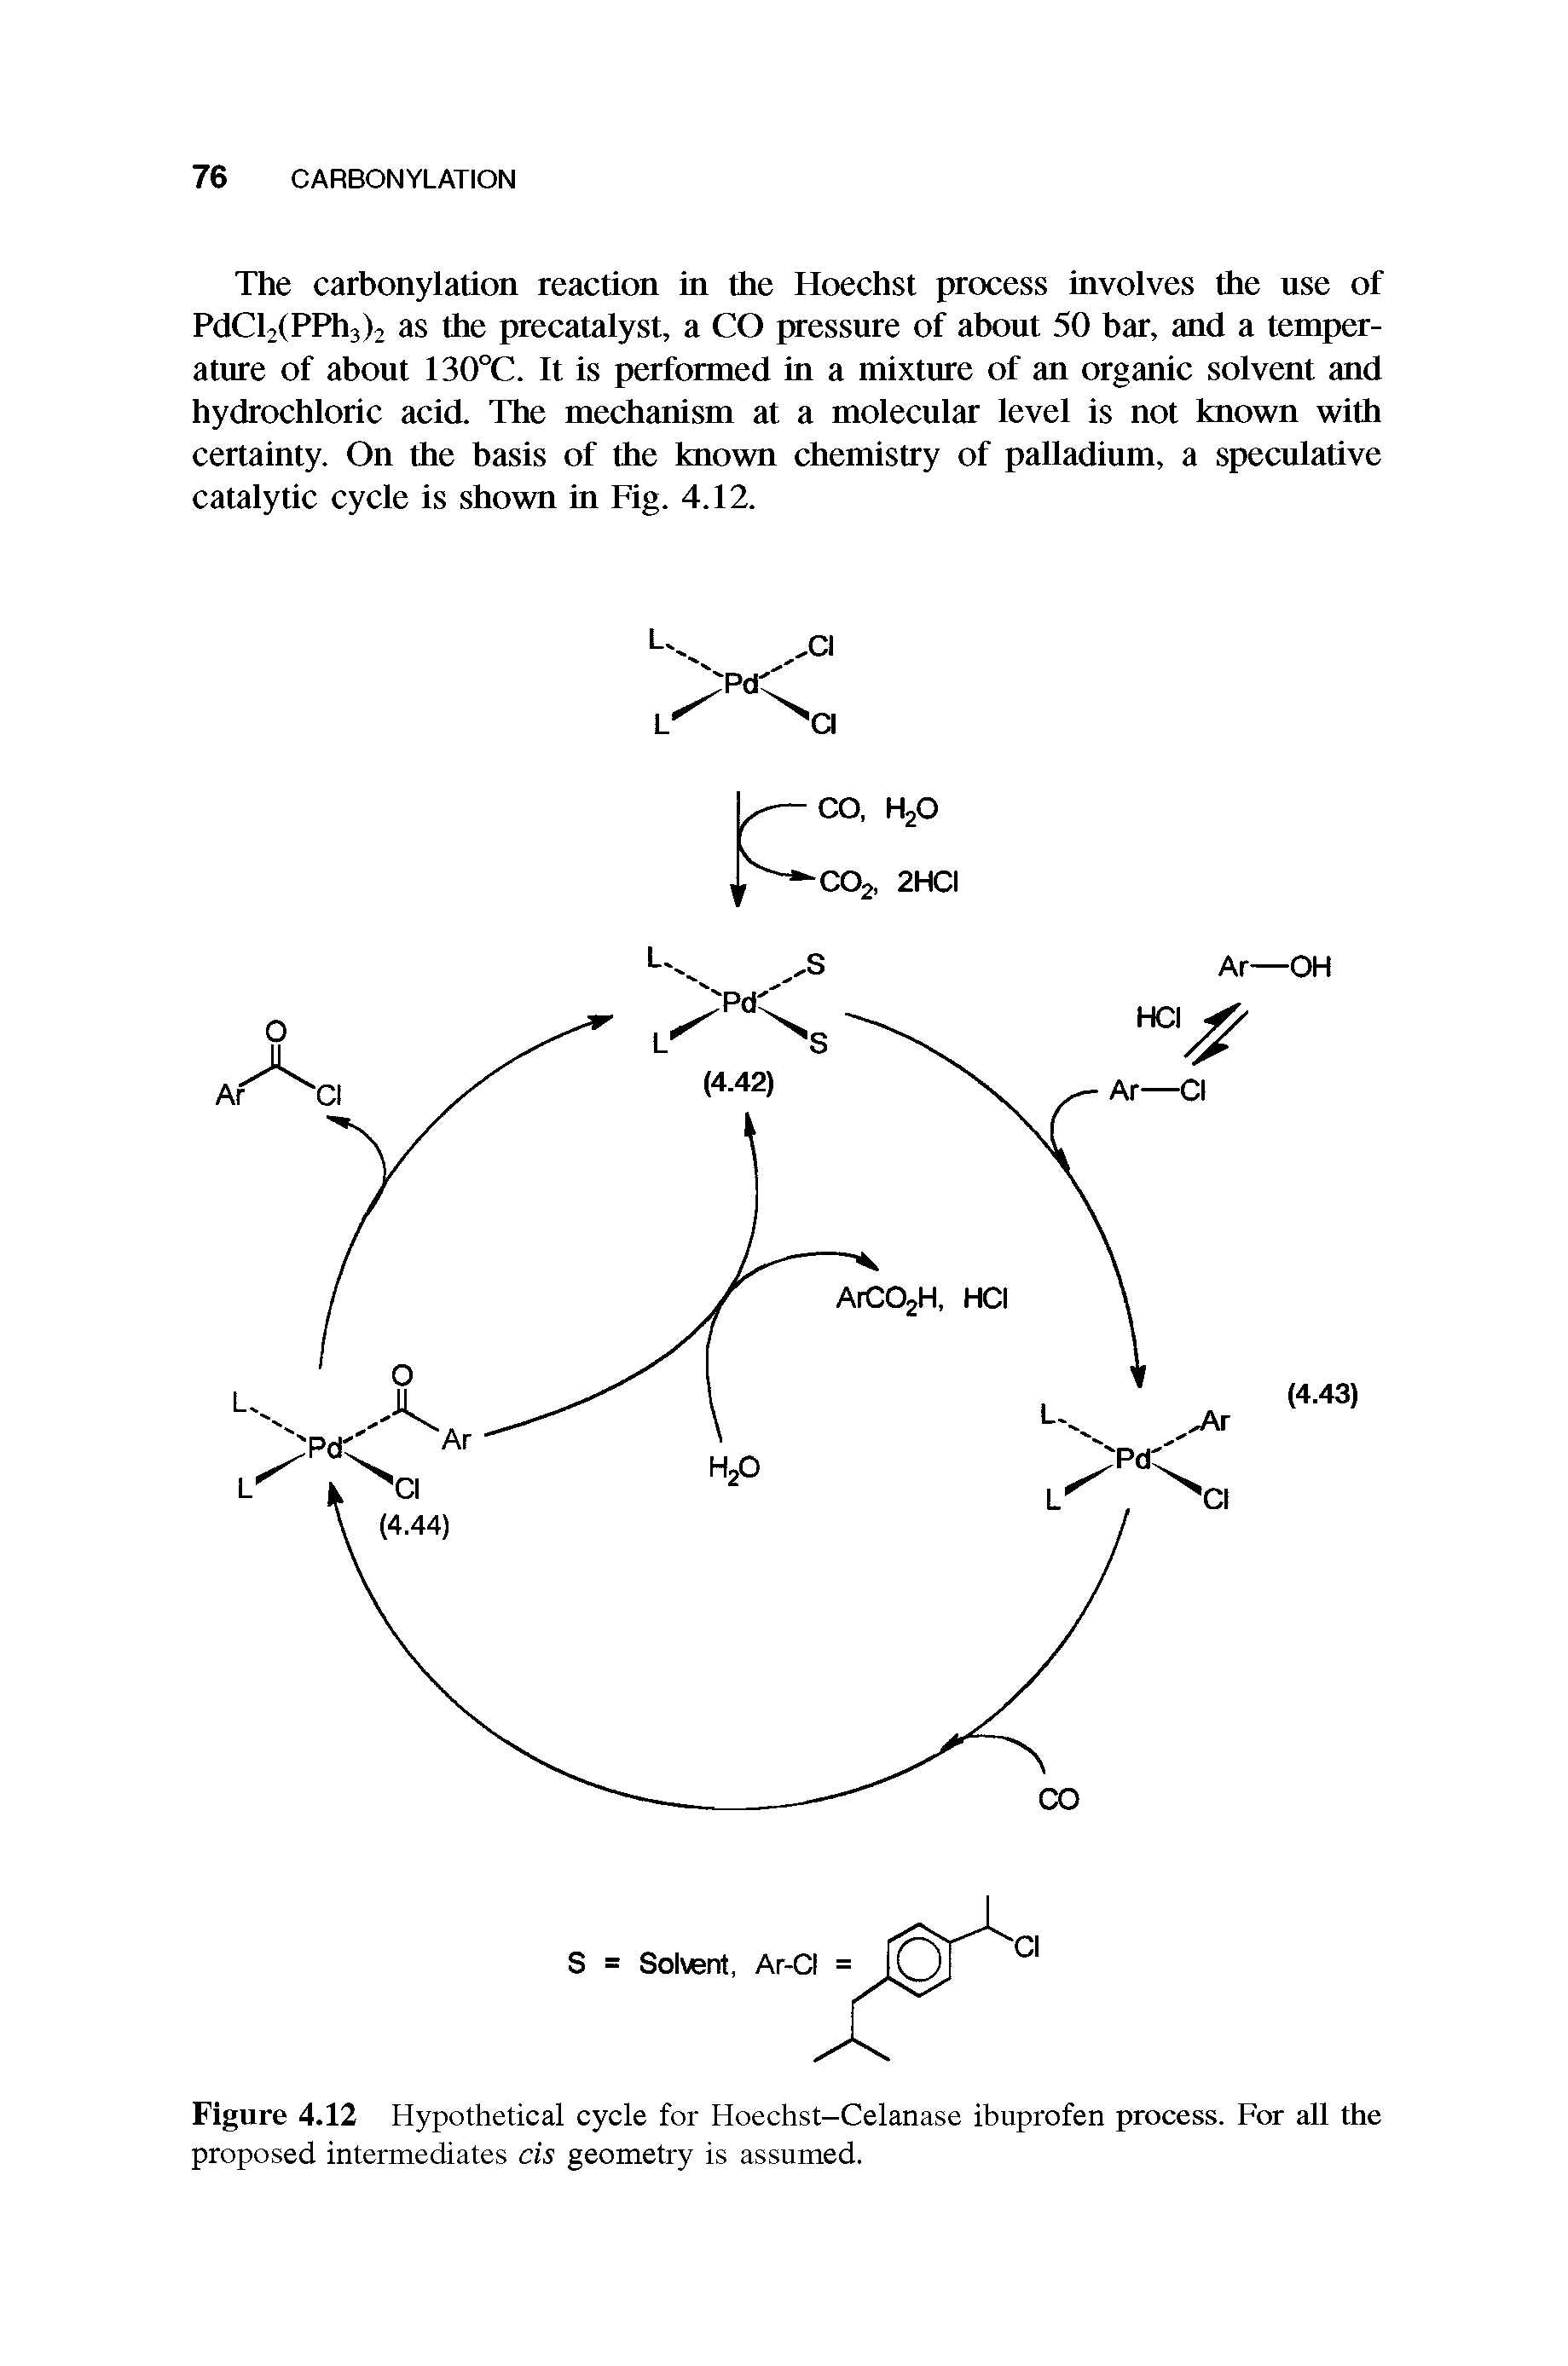 Figure 4.12 Hypothetical cycle for Hoechst-Celanase ibuprofen process. For all the proposed intermediates cis geometry is assumed.